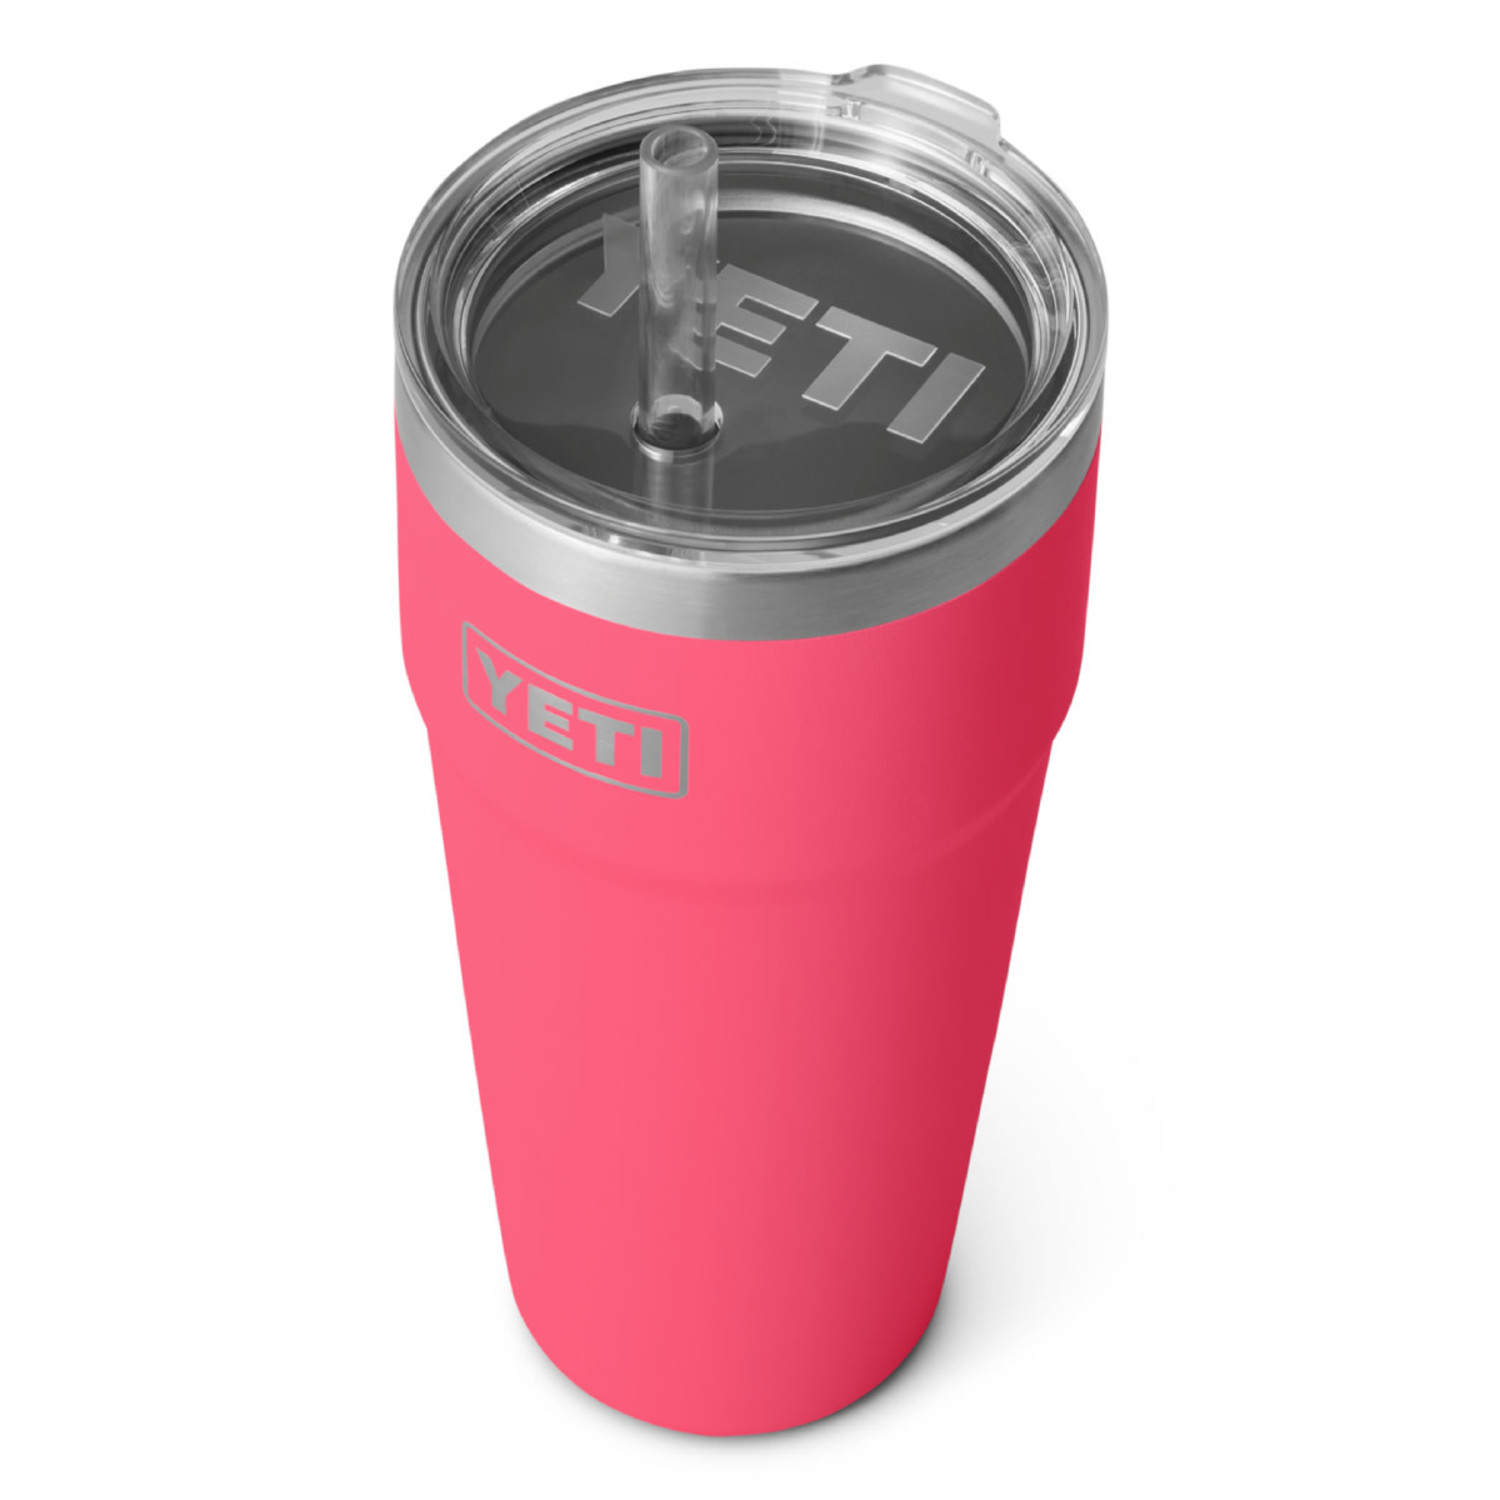  YETI Rambler 26 oz Straw Cup, Vacuum Insulated, Stainless Steel  with Straw Lid, Alpine Yellow : Home & Kitchen